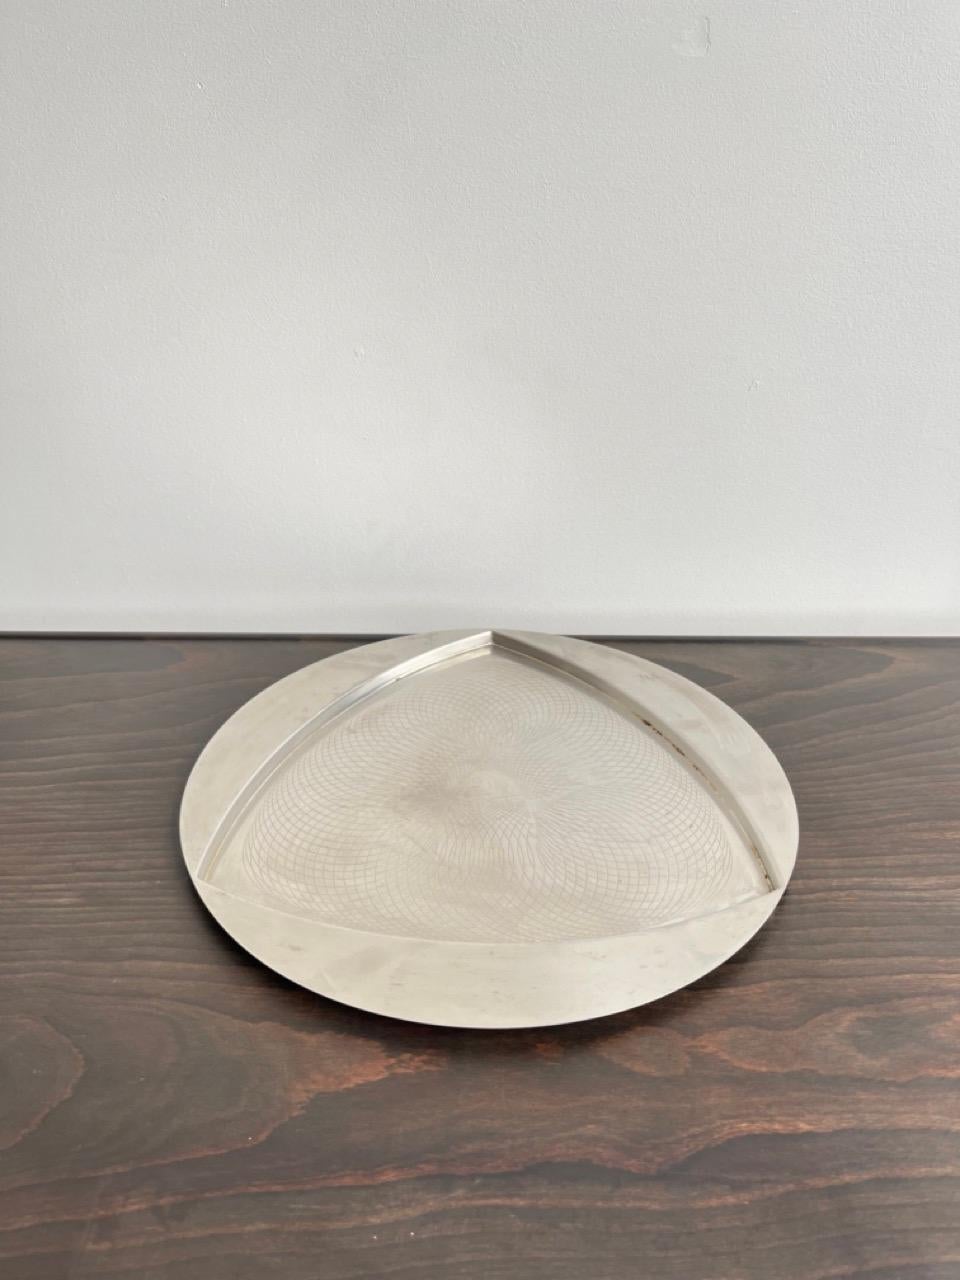 Alessi tray designed by Franco Grignani in 1974 (signed underneath) with engraved pattern. 